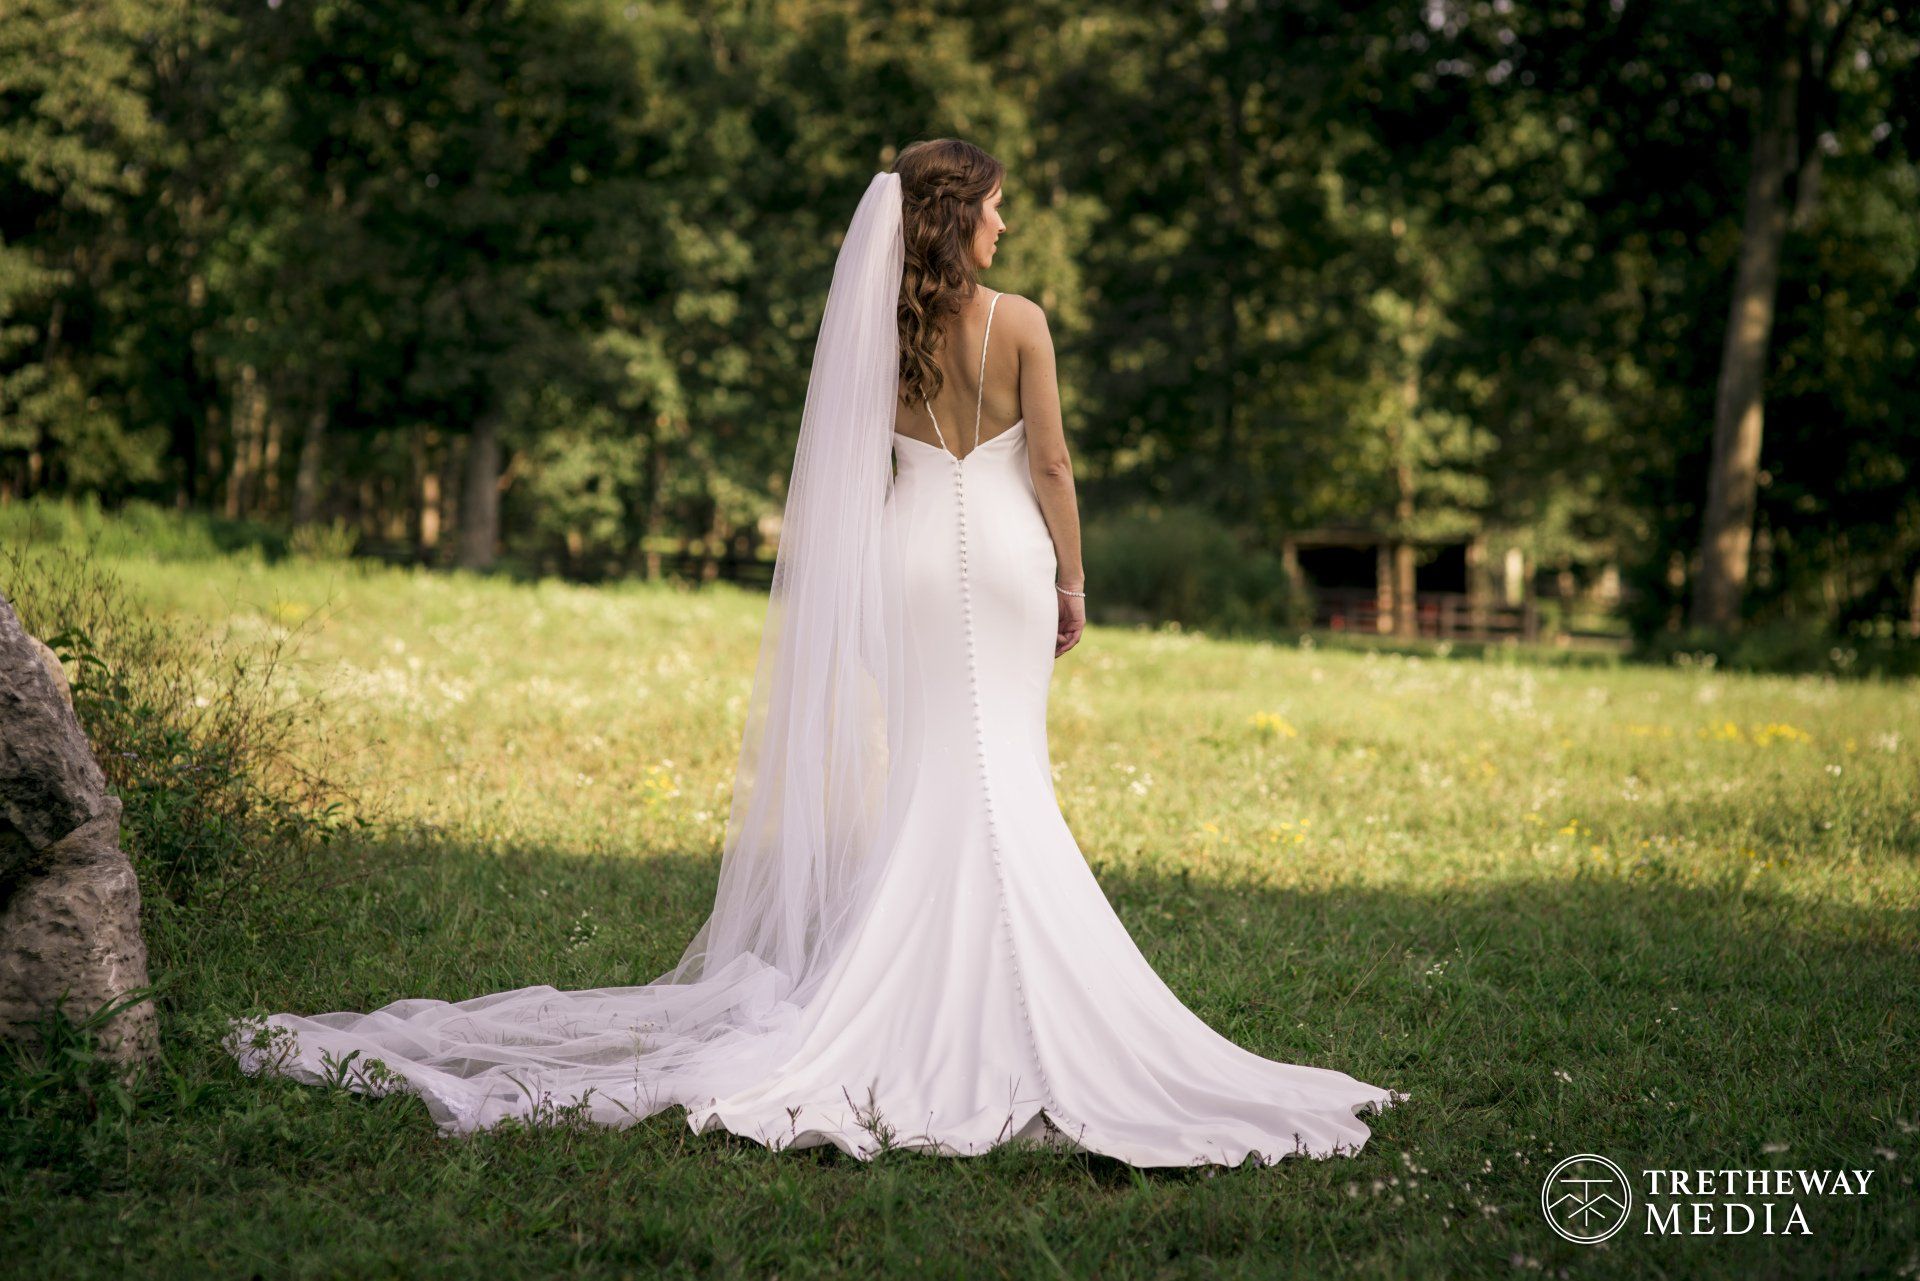 Bride looking into the distance as she poses for her bridal portrait at her wedding venue near Nashville, TN, Nashville Wedding Photographer